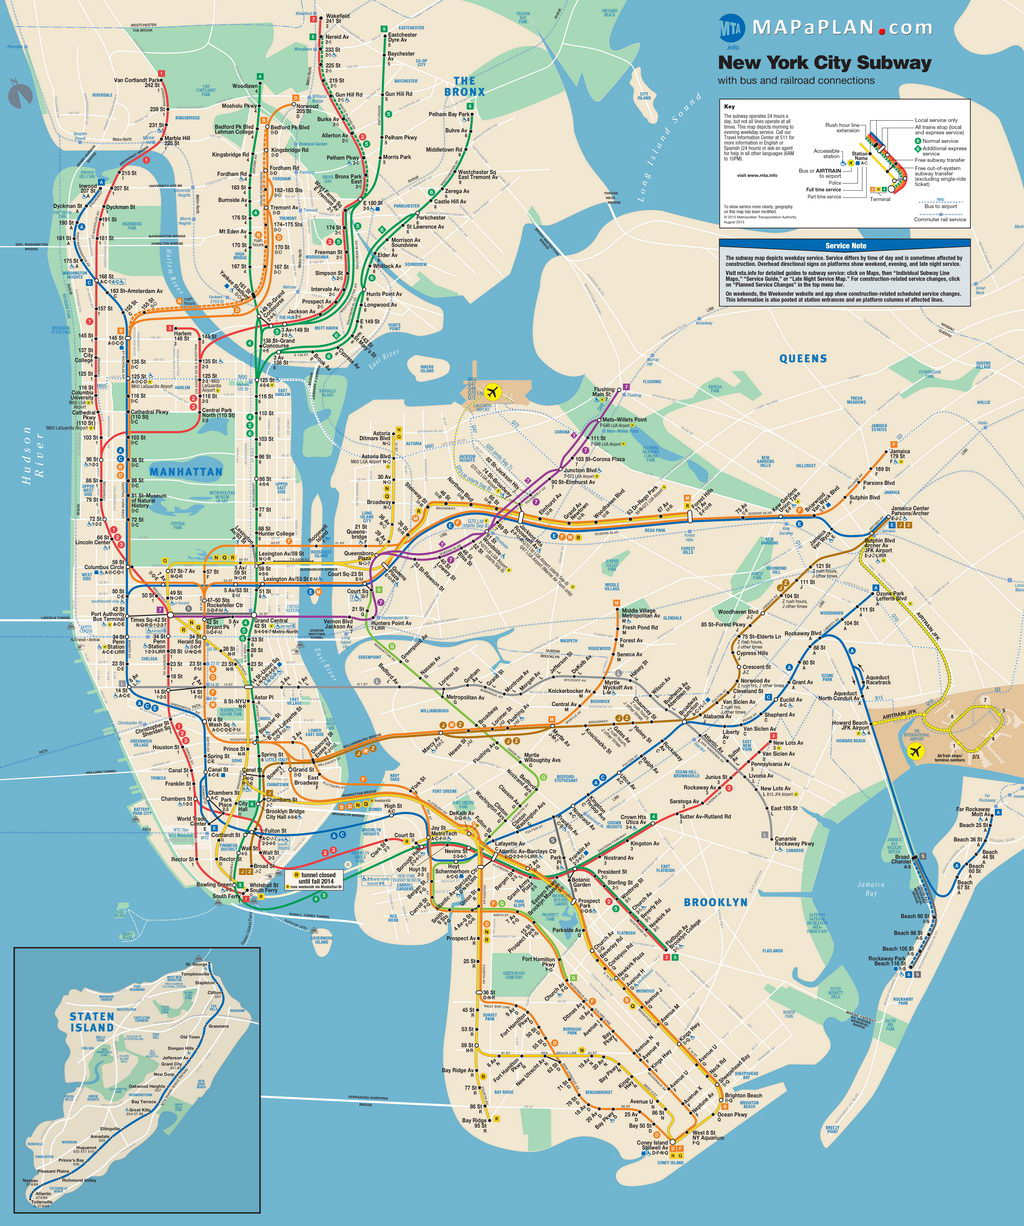 Maps Of New York Top Tourist Attractions - Free, Printable - Printable Map Of New York City